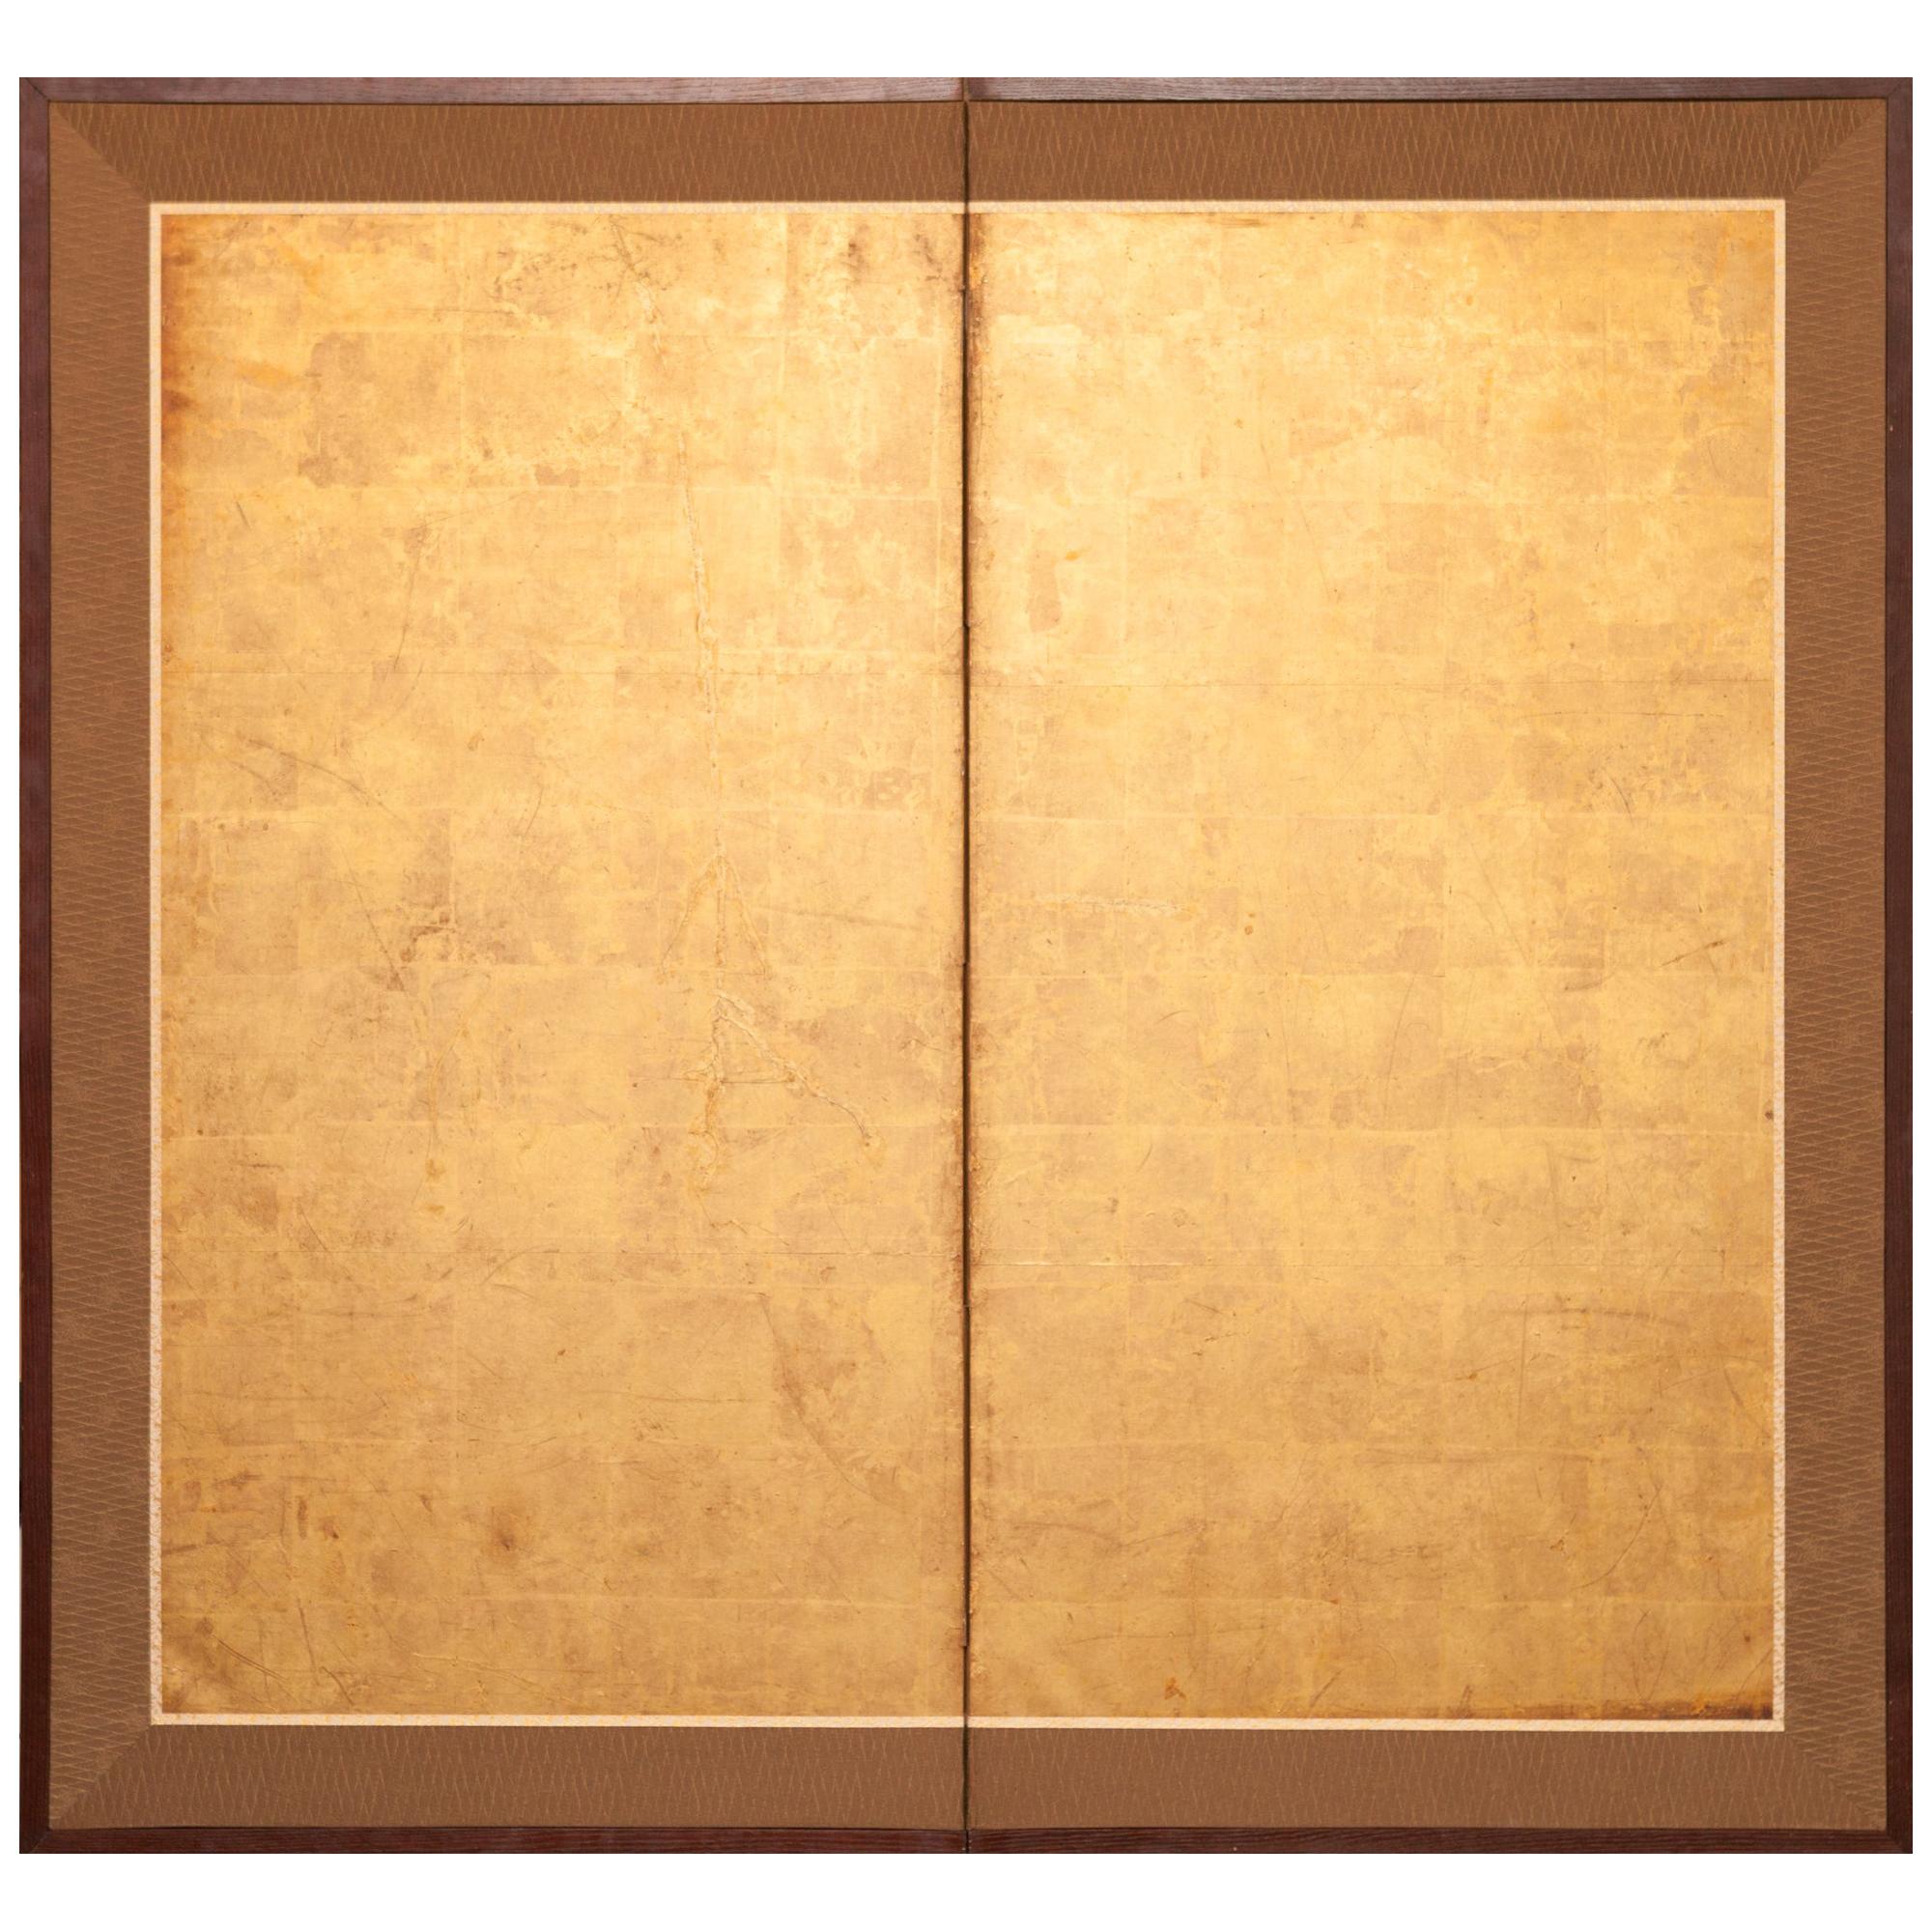 Japanese Two-Panel Screen Gold Leaf on Paper